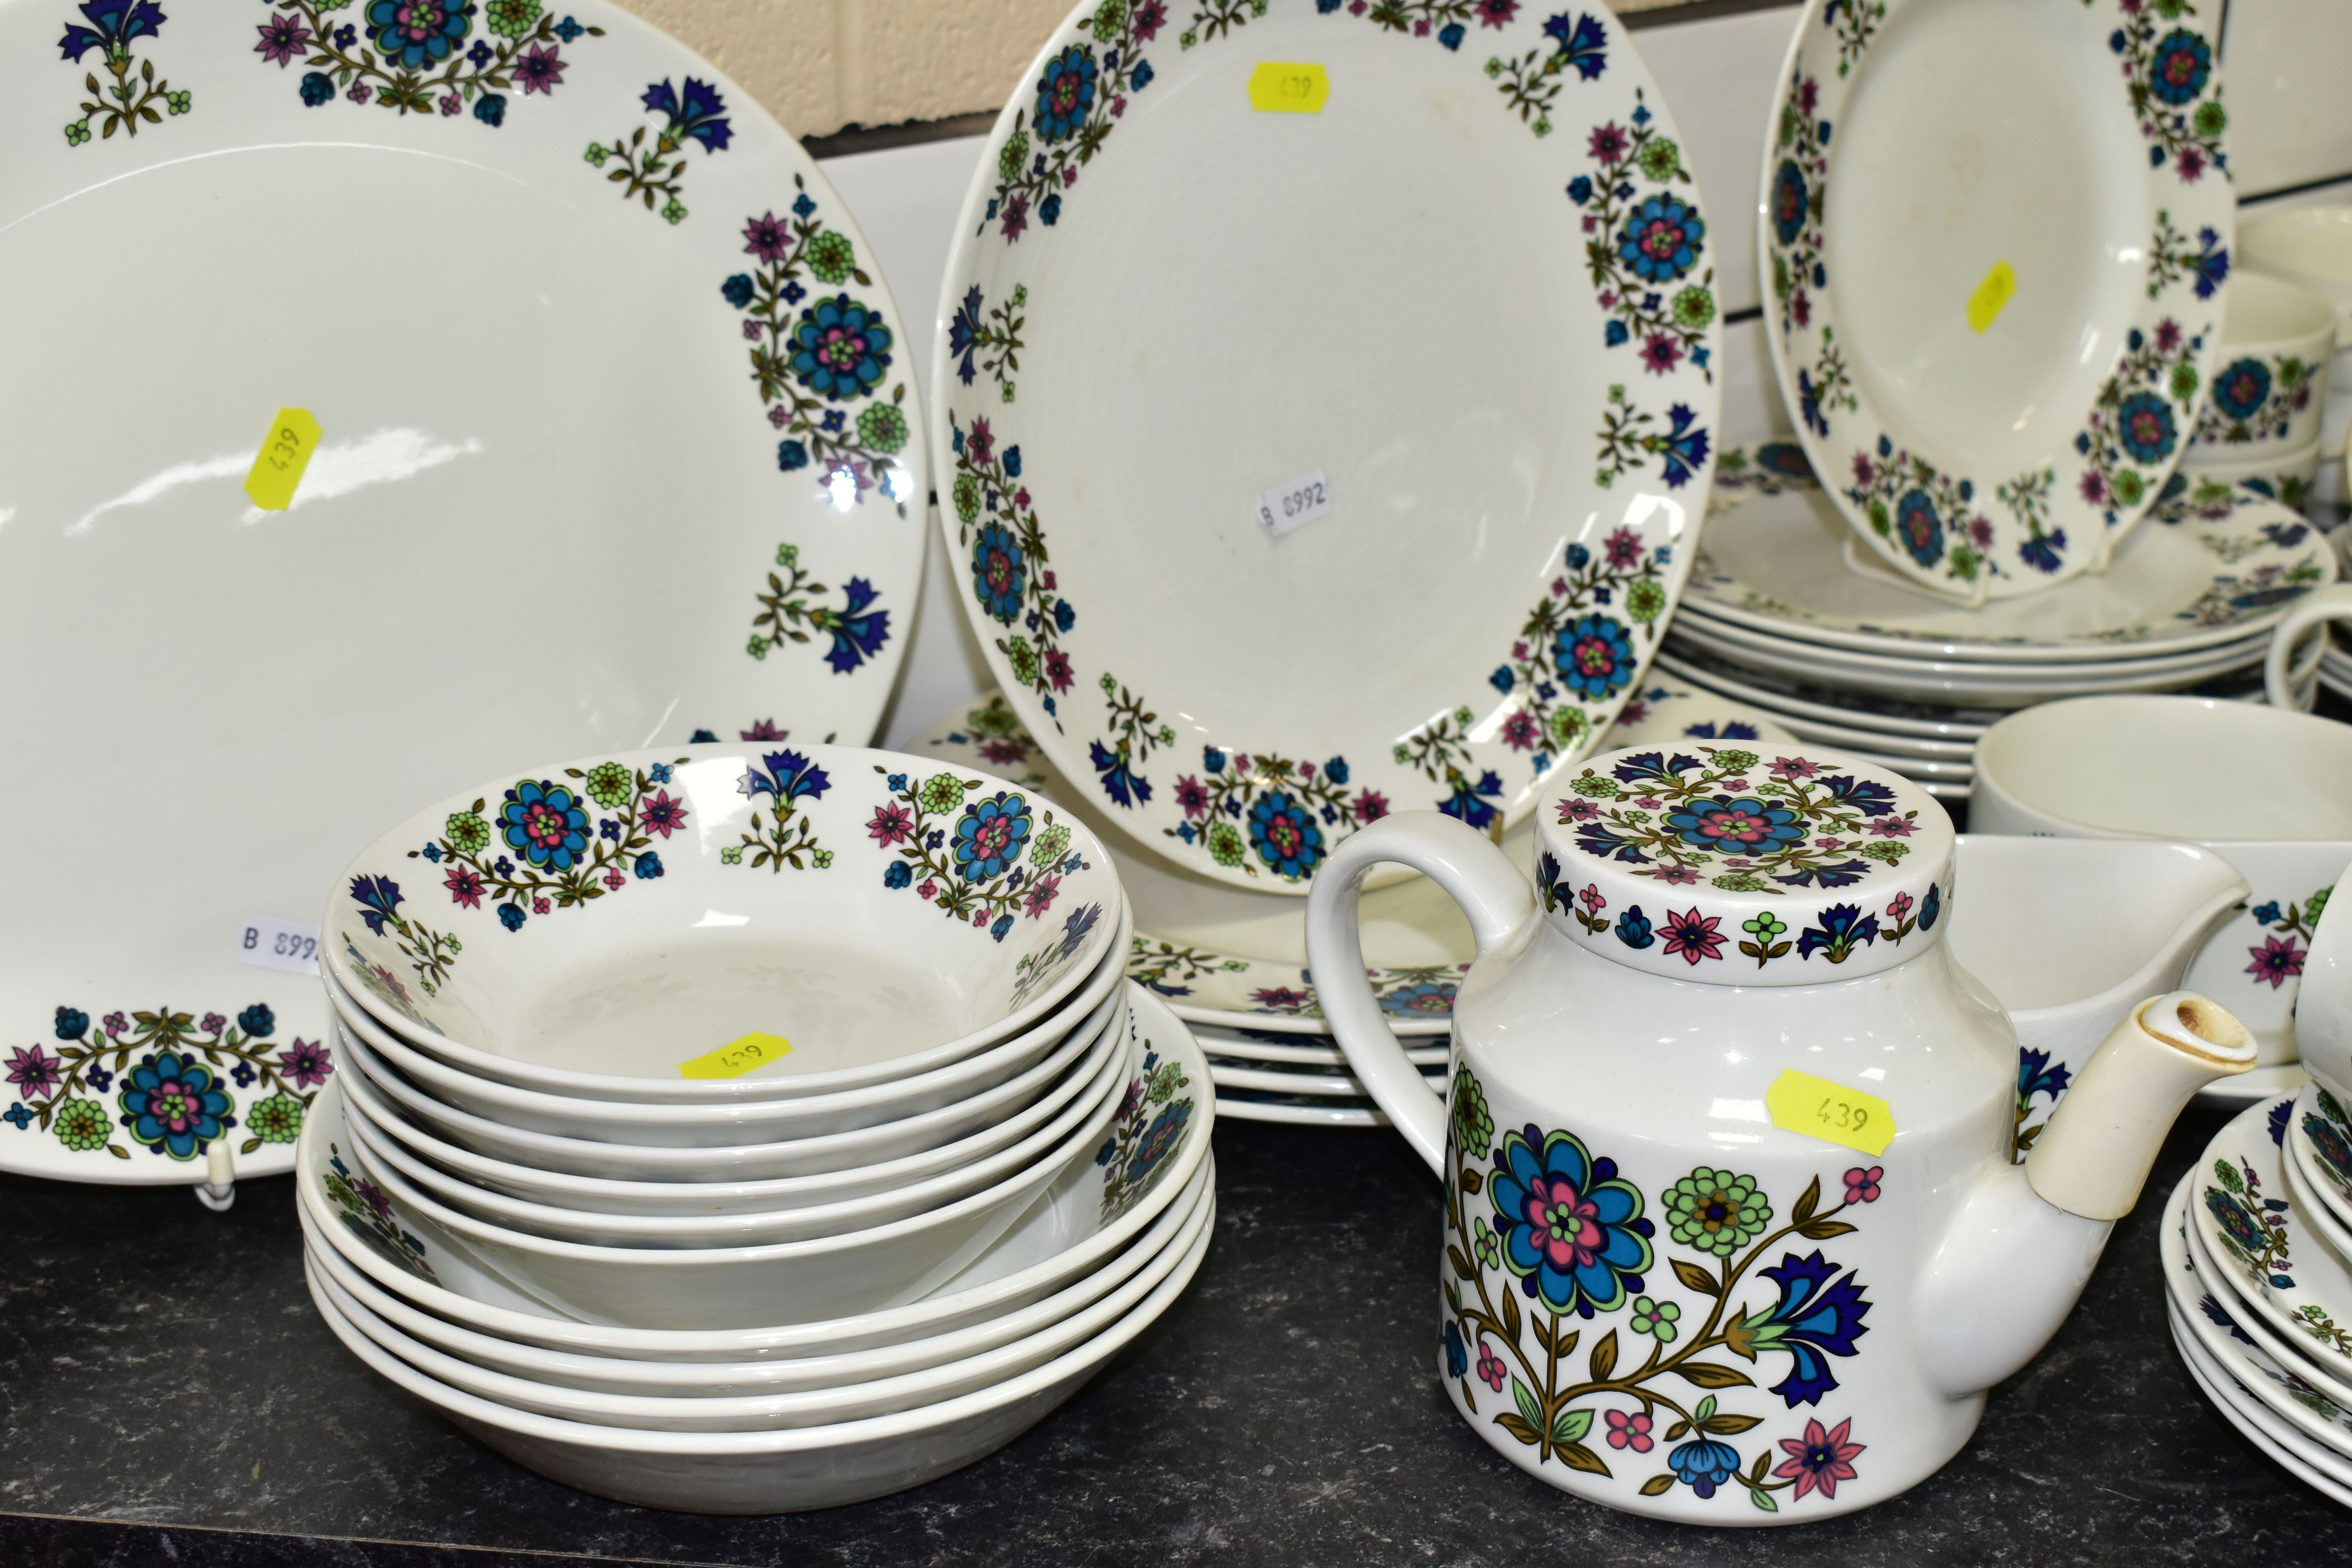 A ROYAL DOULTON 'LARCHMONT' PATTERN COFFEE SET TOGETHER WITH A MIDWINTER 'COUNTRY GARDEN' PATTERN - Image 5 of 7